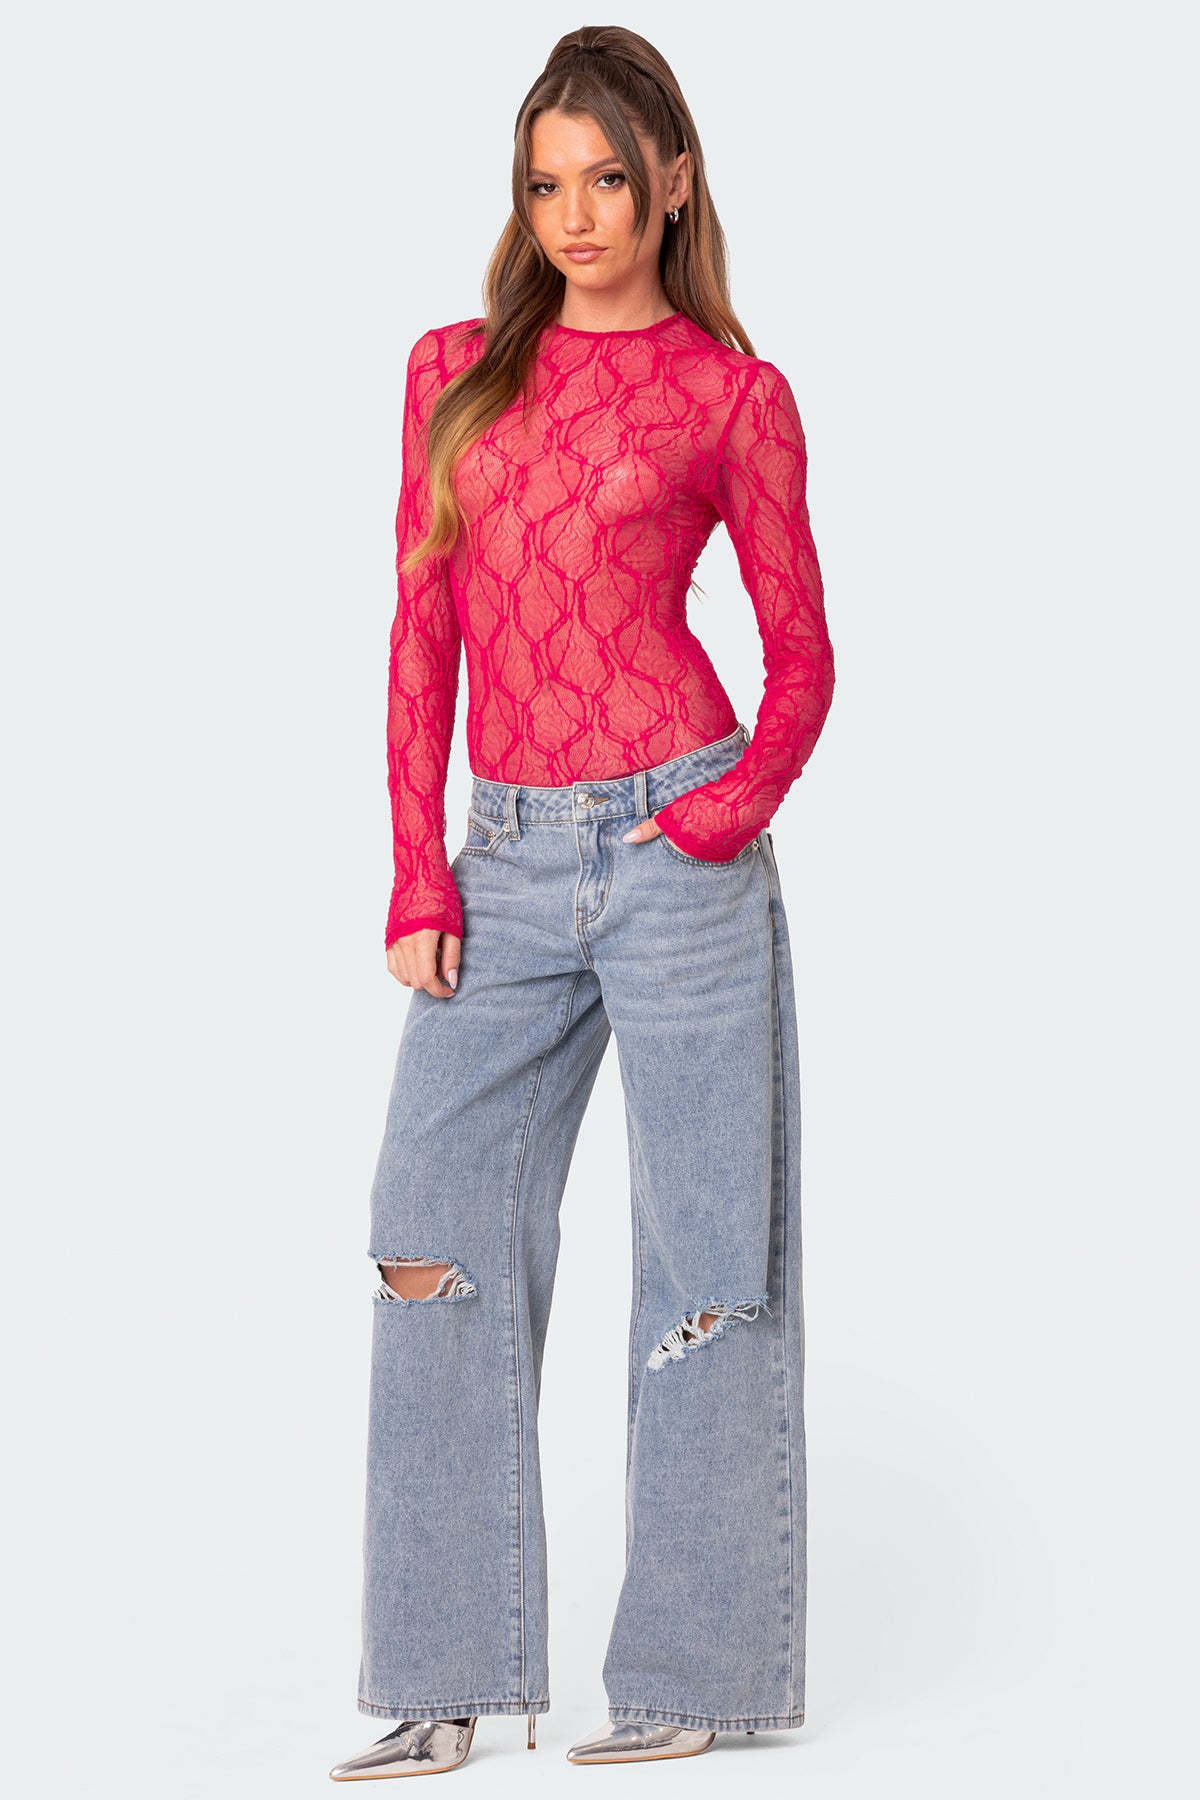 Lina Textured Sheer Lace Bodysuit